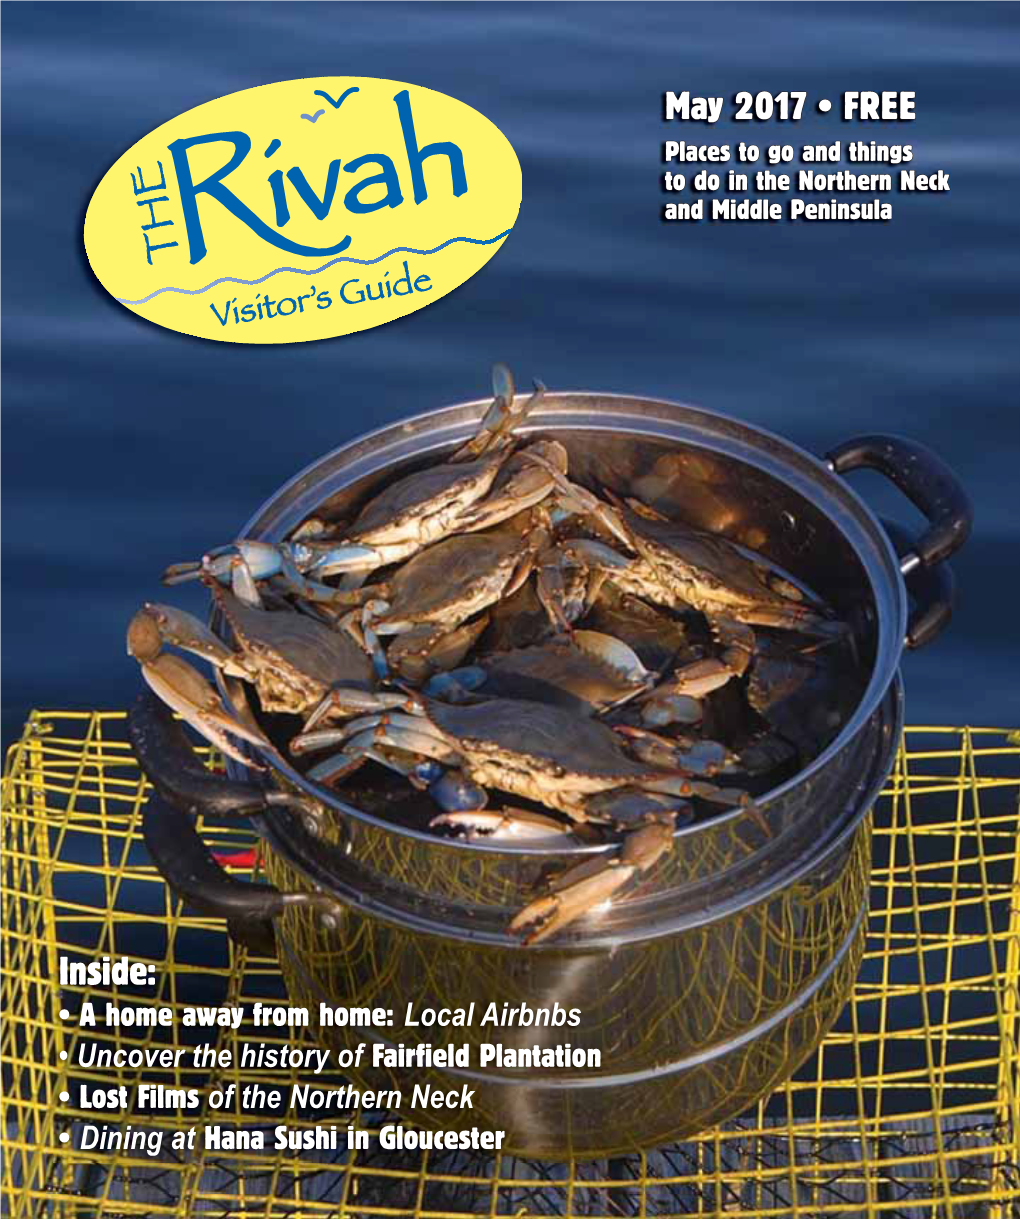 The May 2017 Rivah Visitor's Guide